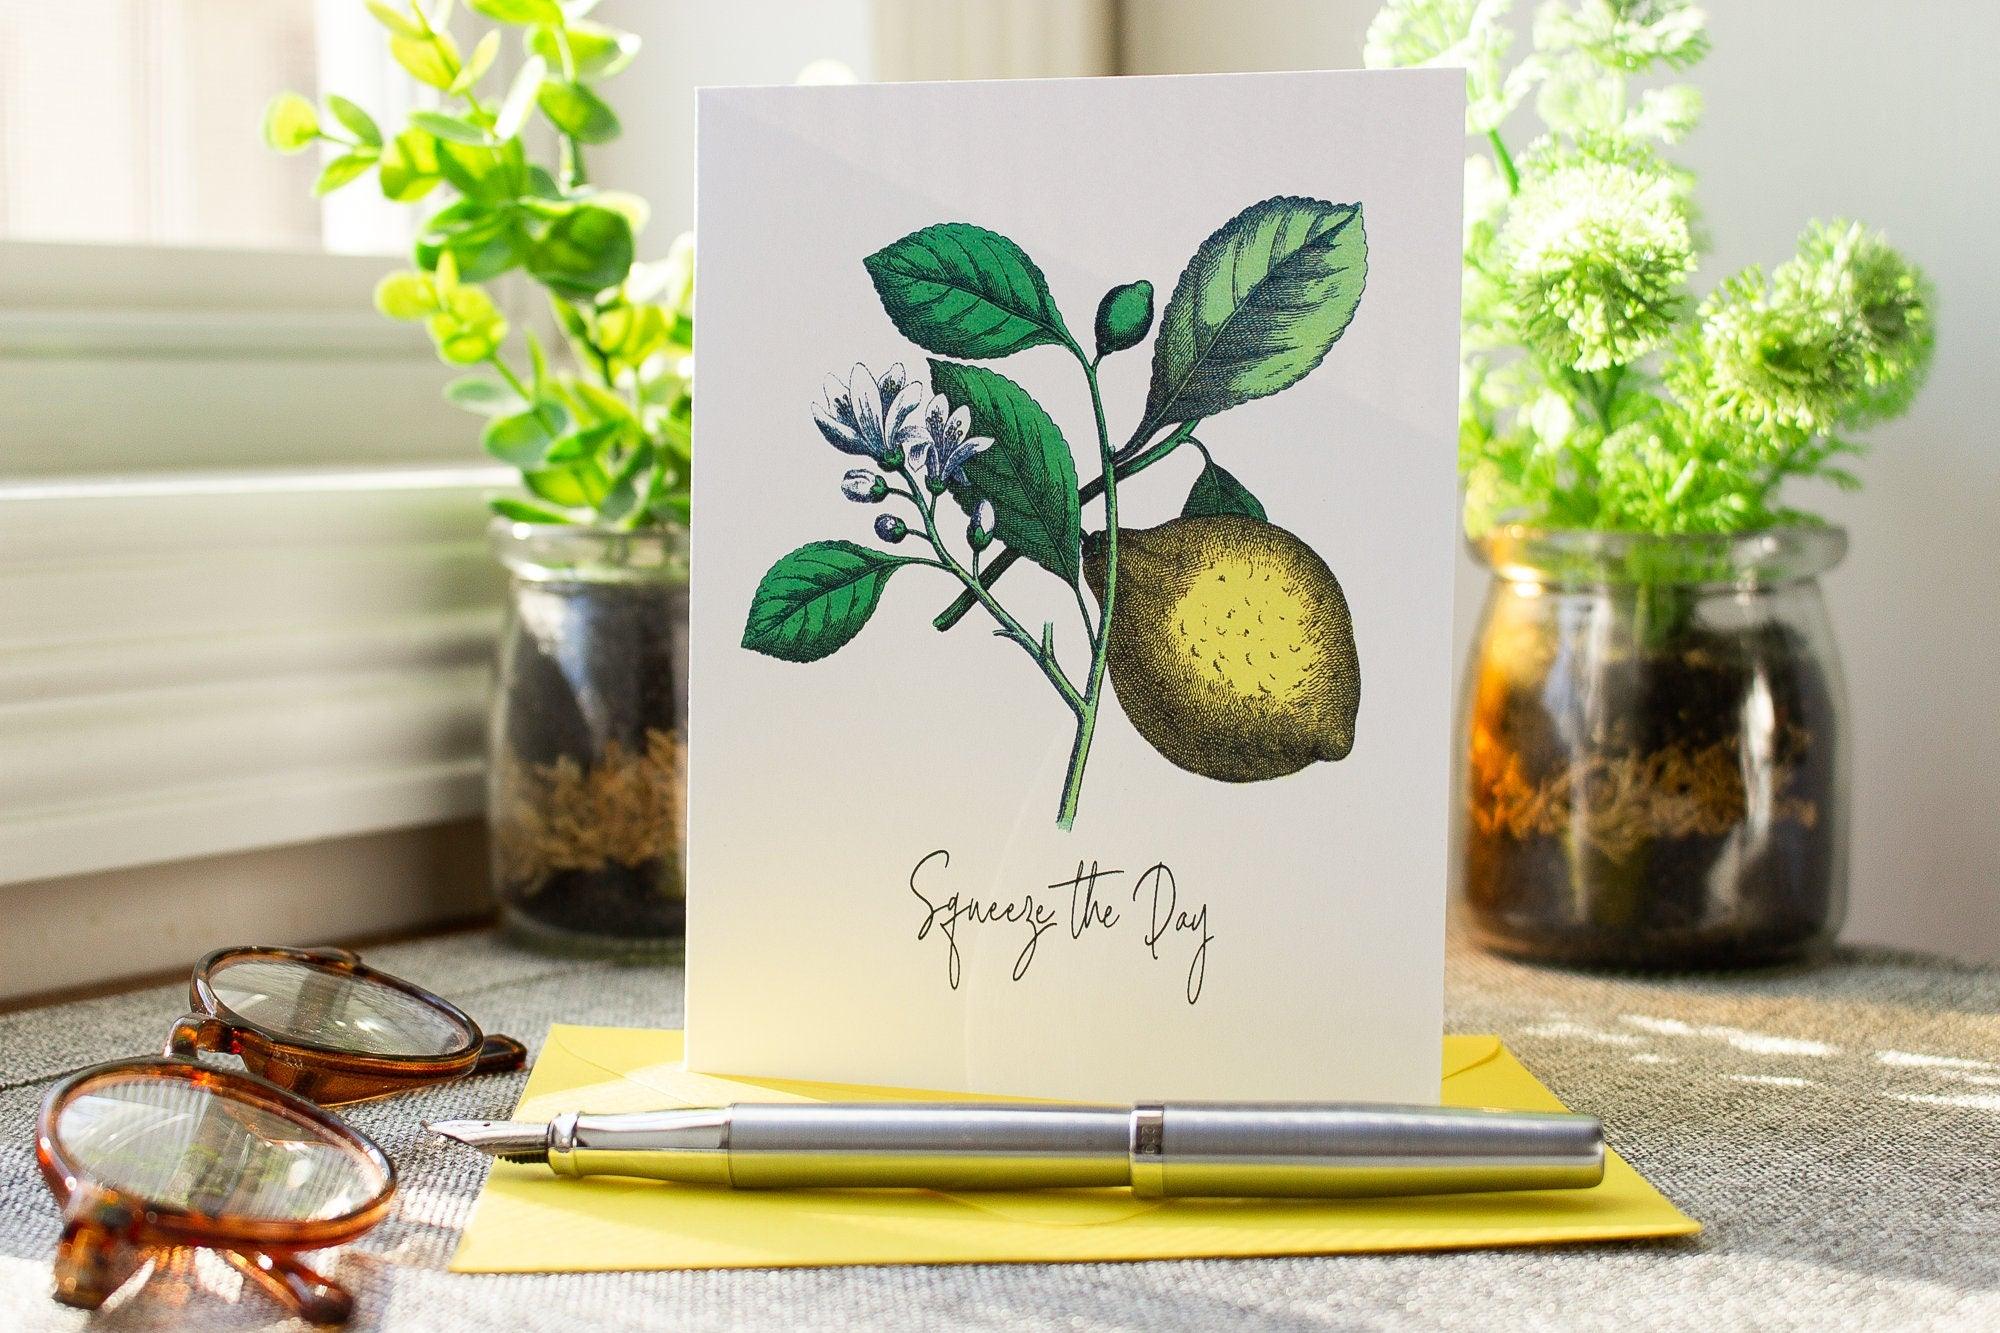 Squeeze the Day  Encouragement Greeting Card - Motivational Card for Best Friend - Lemon Pun Card - Just Because Inspirational Card